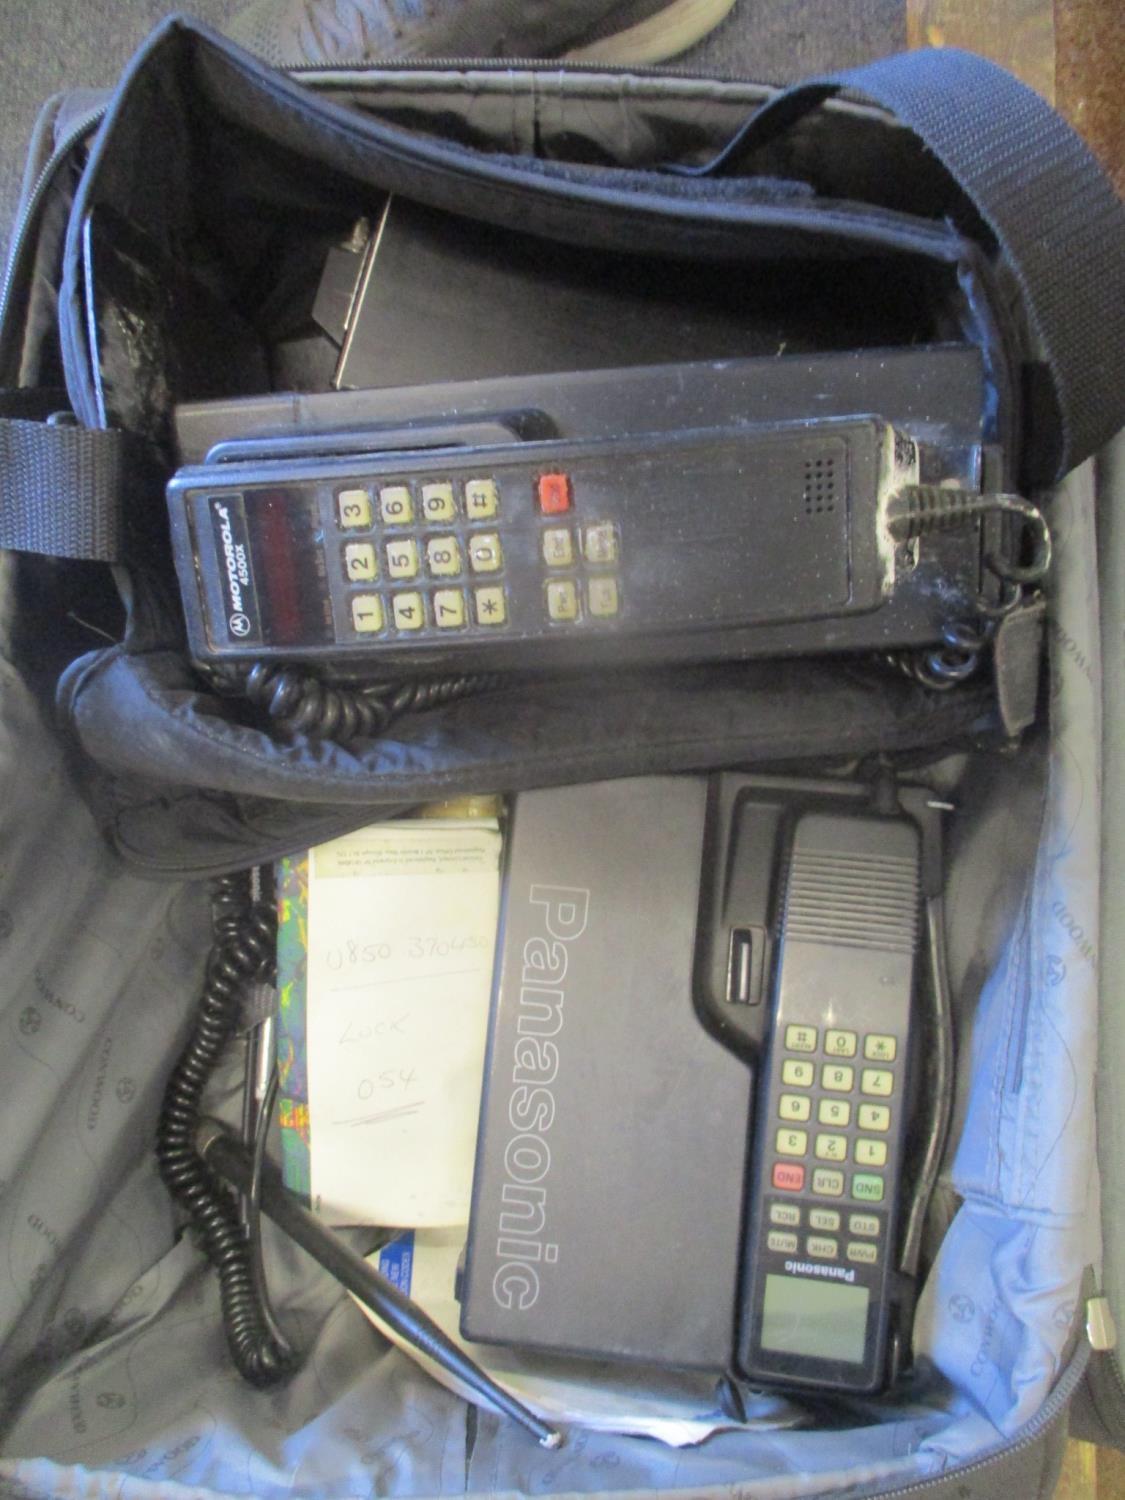 Two Retro mobile phones to include a Panasonic and a Motorola 4500X